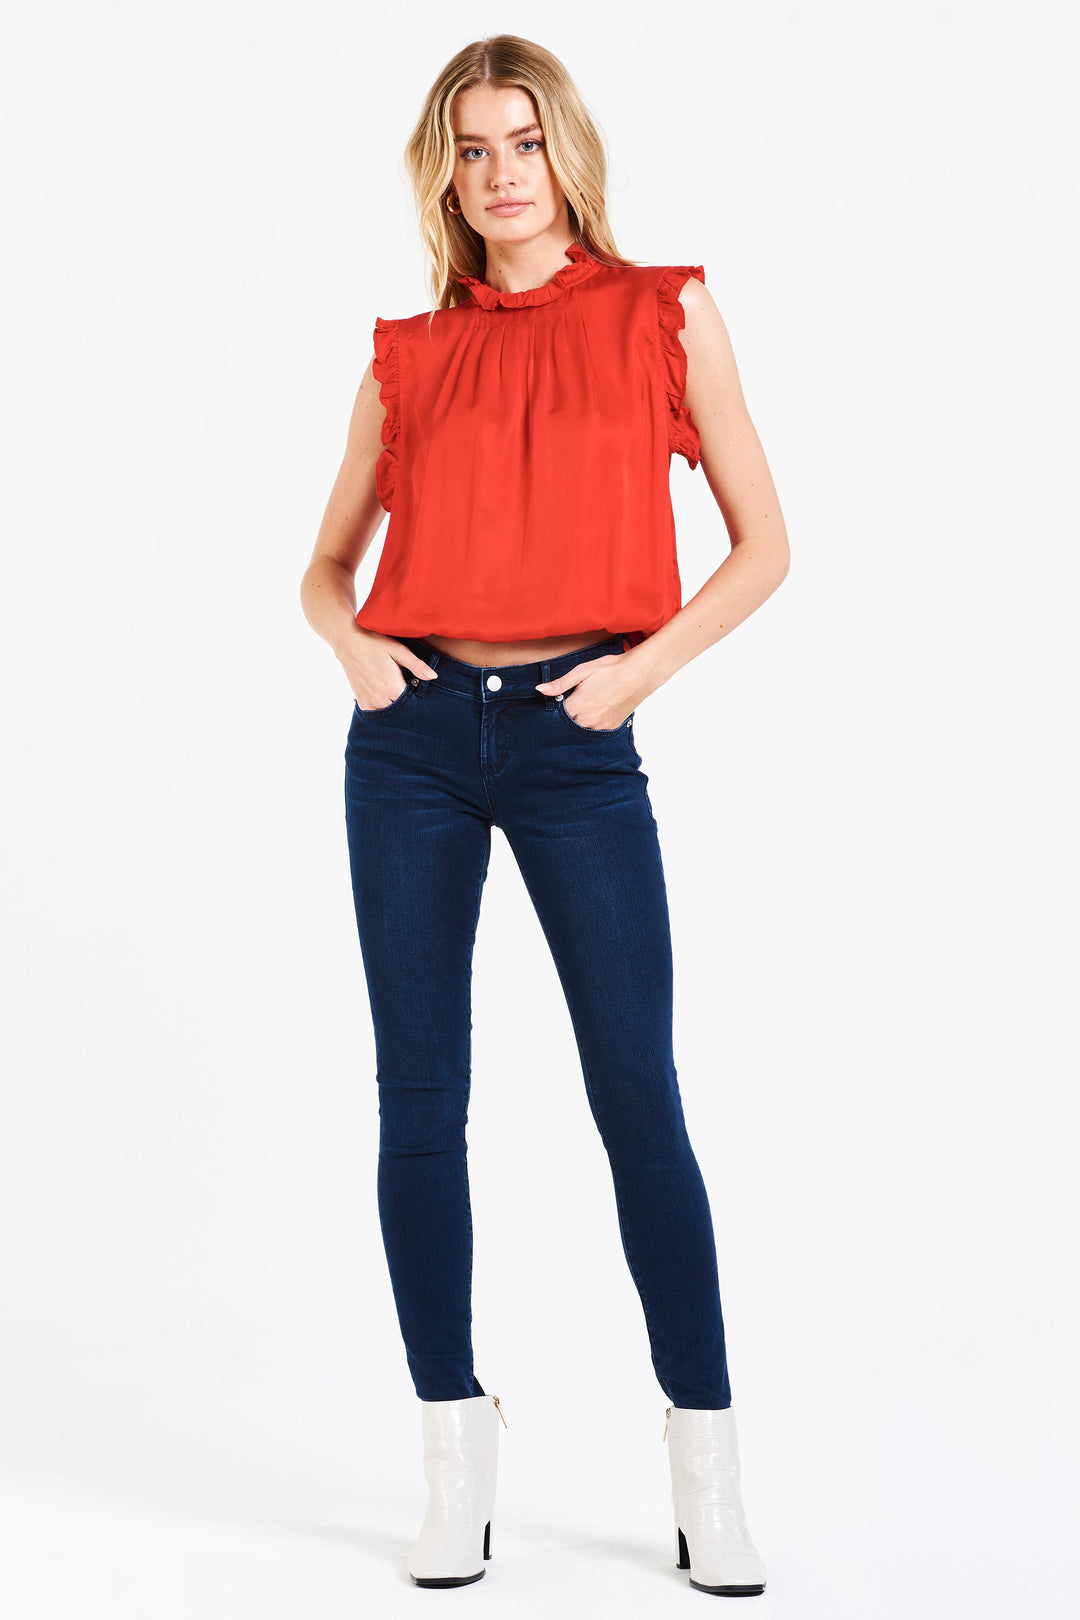 image of a female model wearing a MELISSA SILKY RUFFLE TOP BARBERRY TOPS